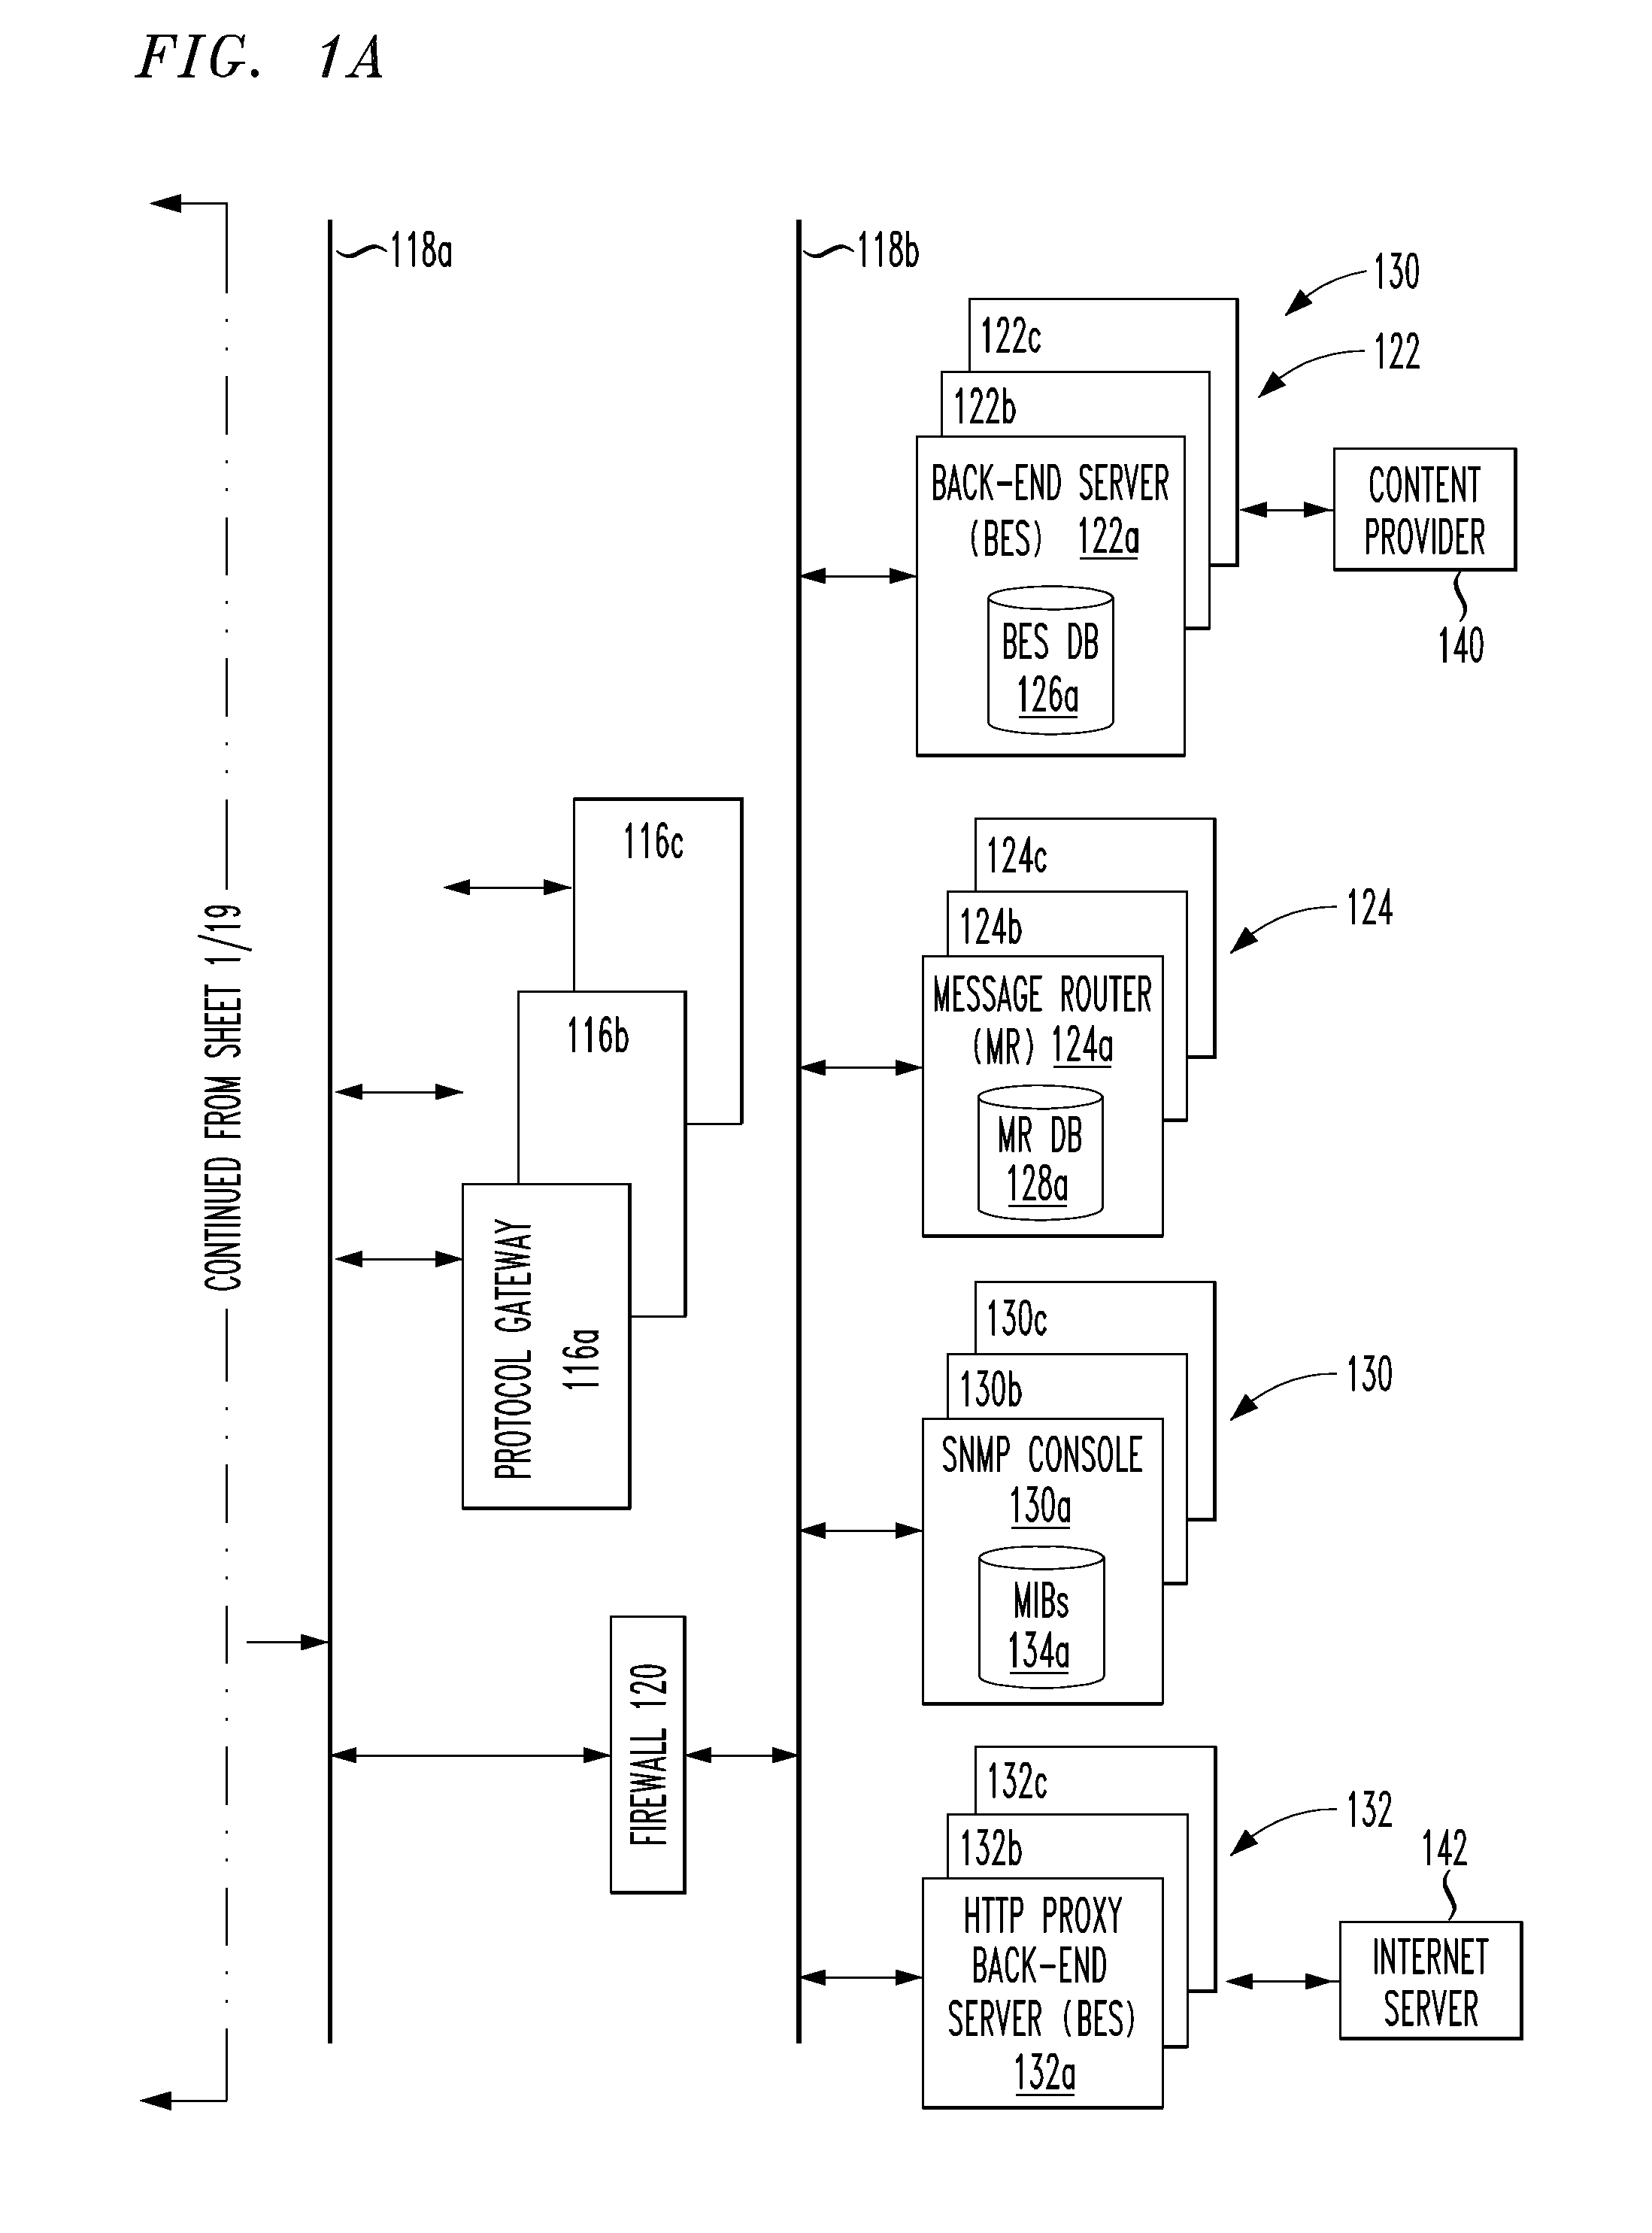 System and method for developing applications in wireless and wireline environments